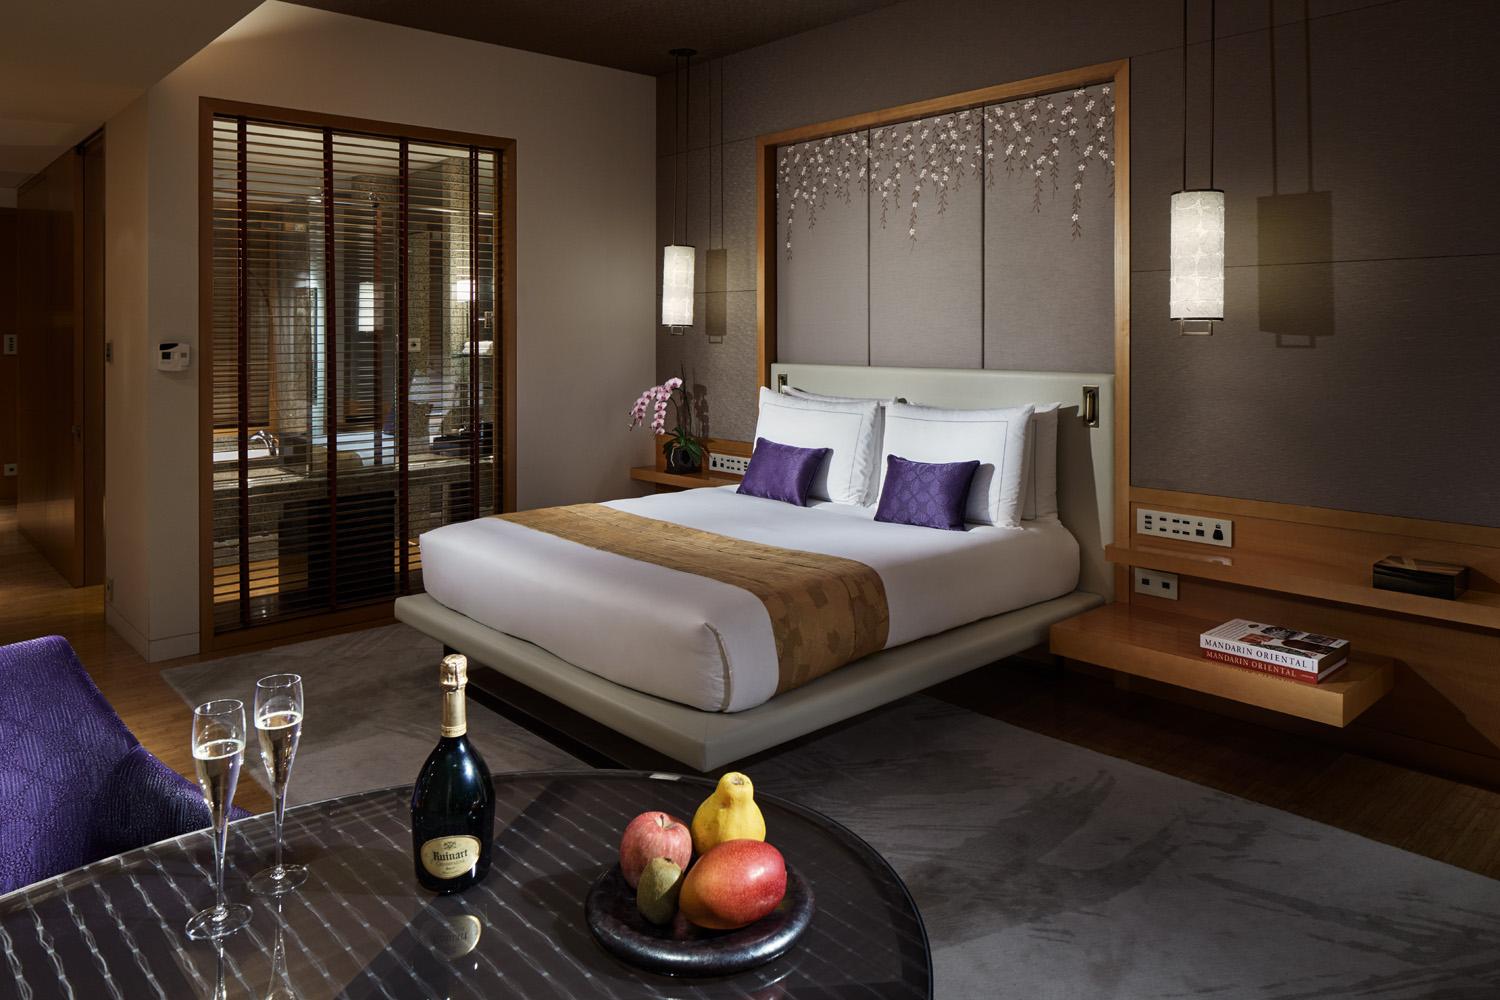 Nuno Mandarin Oriental Tokyo 2019 Completes Extensive Renovation Of All Guestrooms And Suites